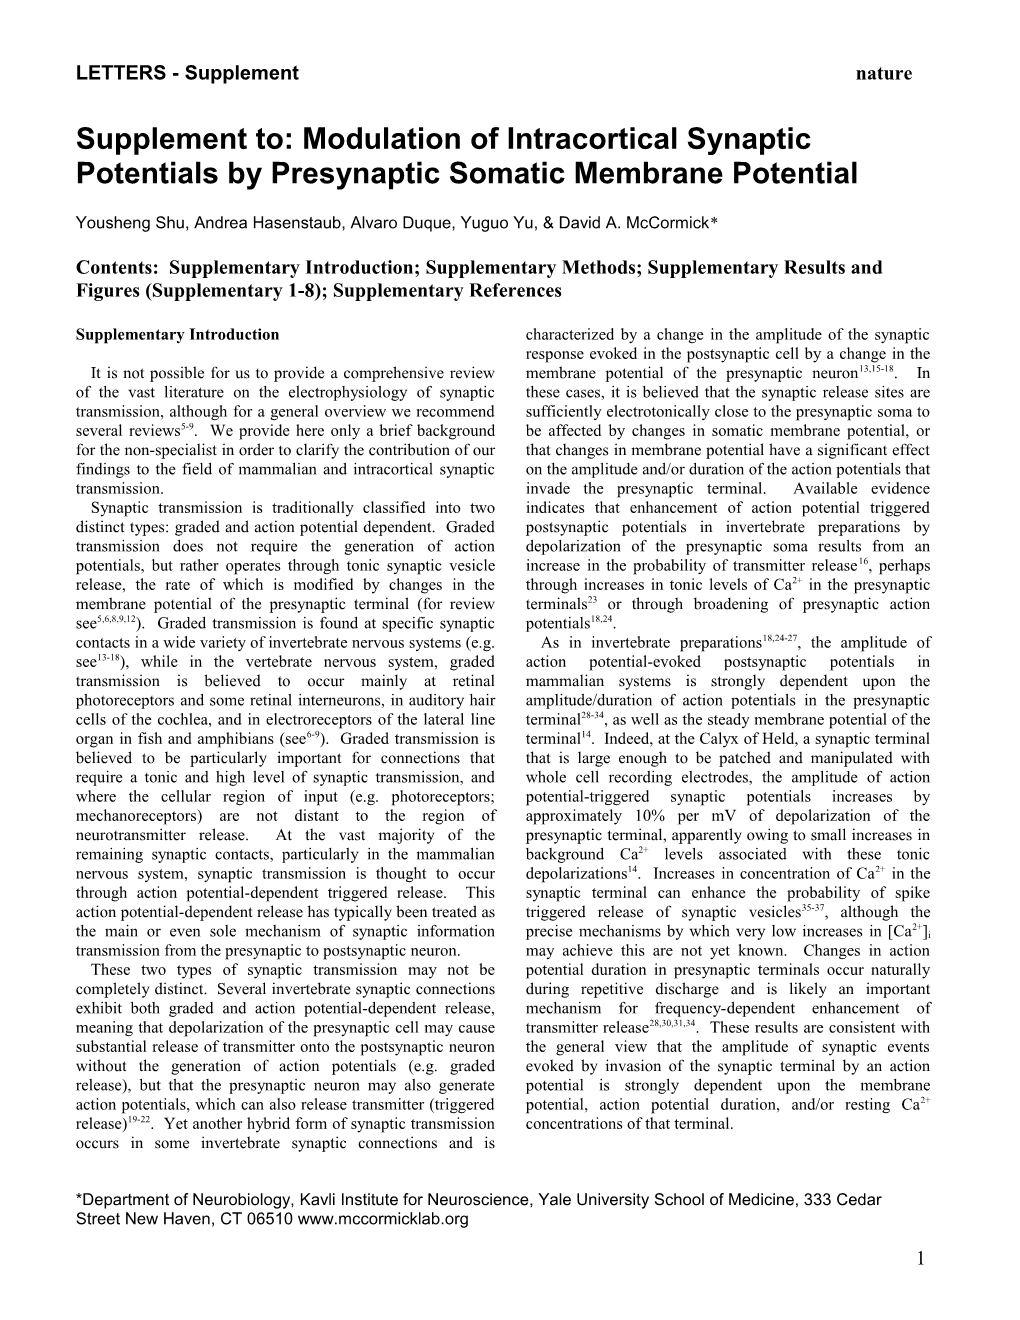 Supplement: Modulation of Intracortical Synaptic Potentials by Presynaptic Somatic Membrane